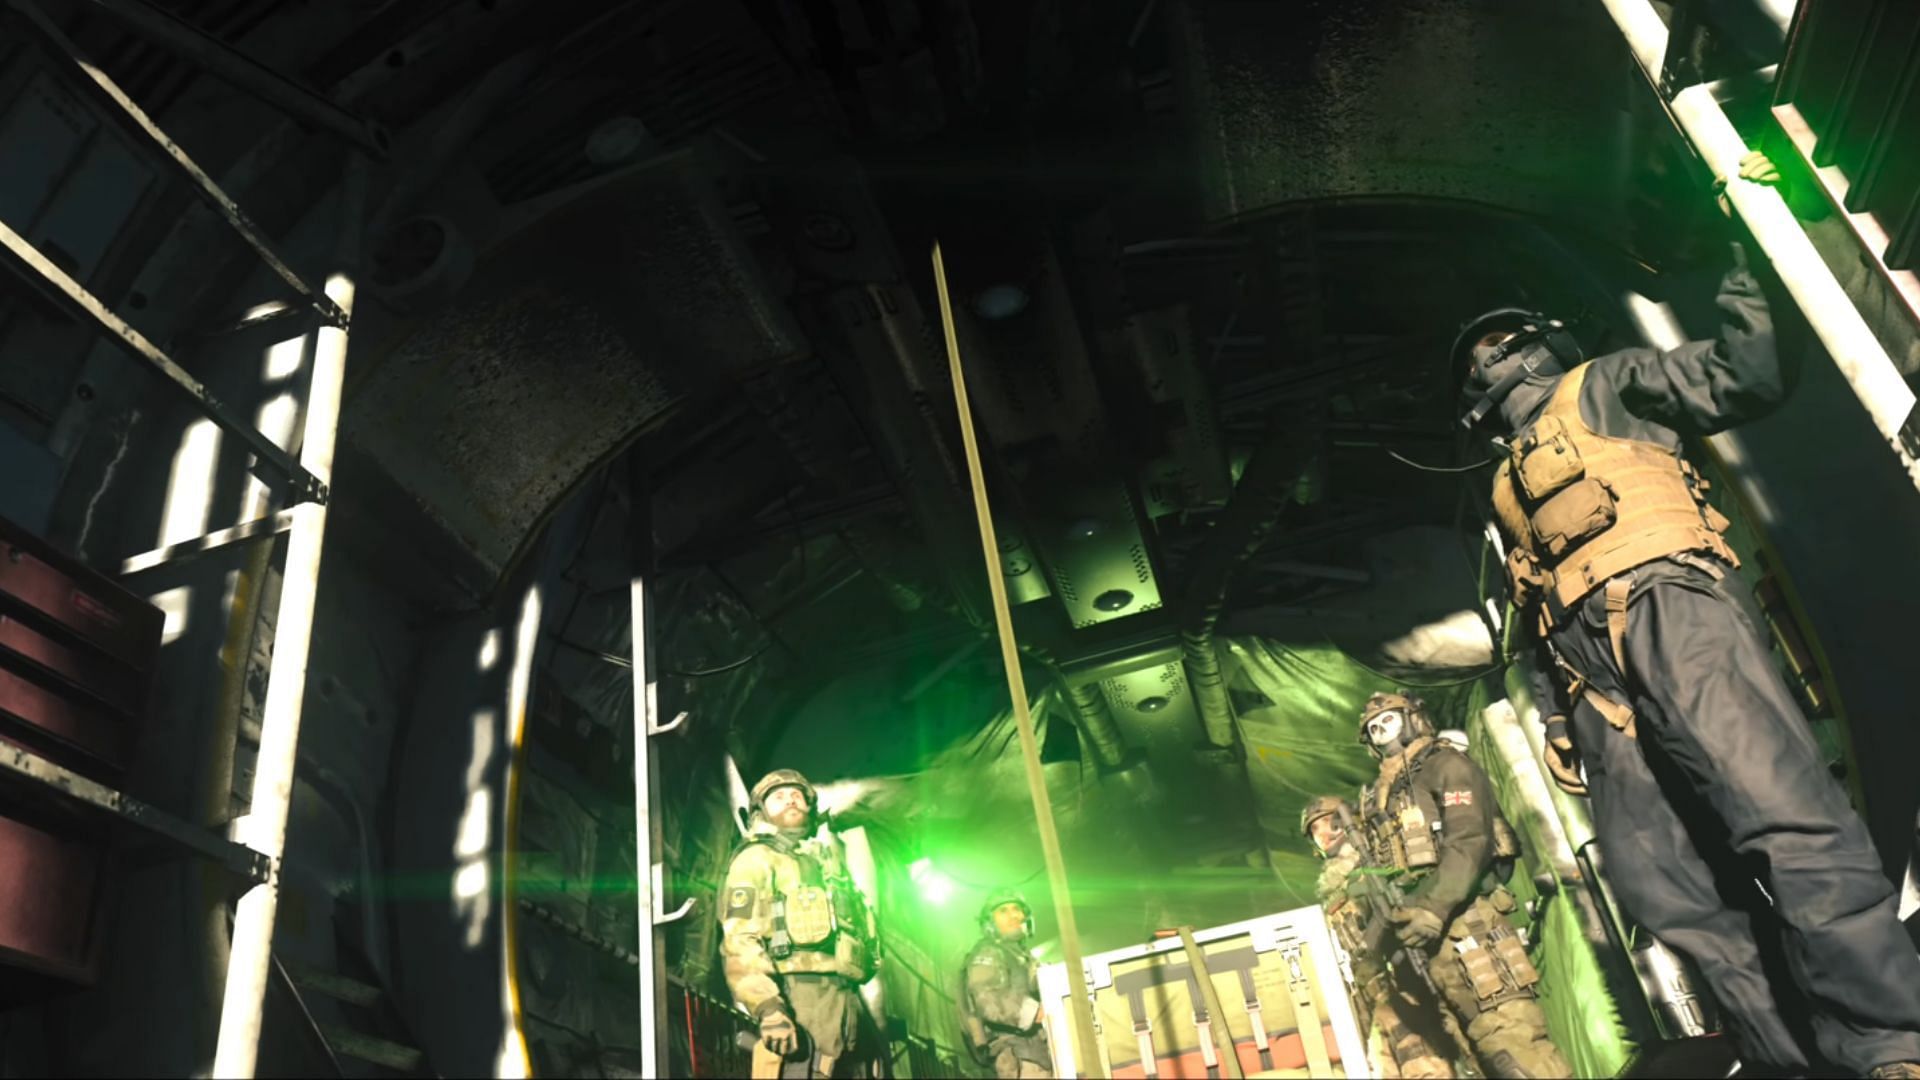 MW3 Campaign Early Access Download, Start Times & Gameplay - DETONATED